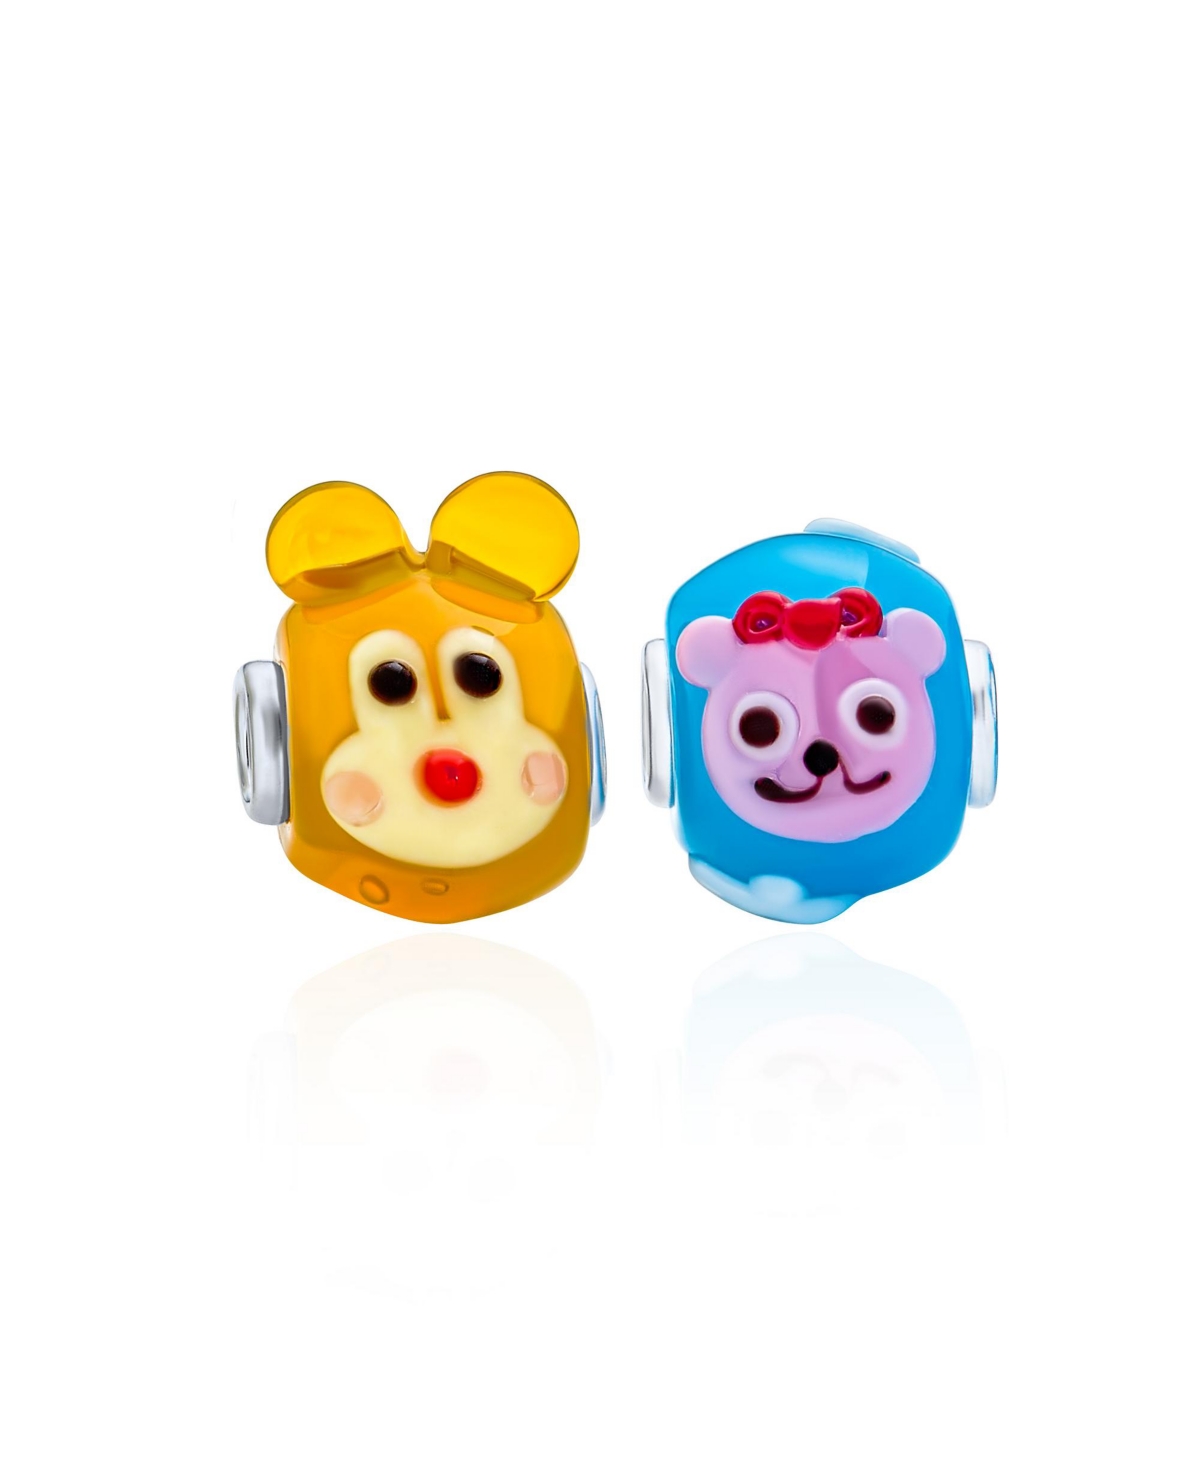 Set of 2 Colorful 3D Cartoon Mother Daughter Teddy Bear Glass Charms Bead Lamp Work Fits European Charm Bracelet Murano Glass Sterling S